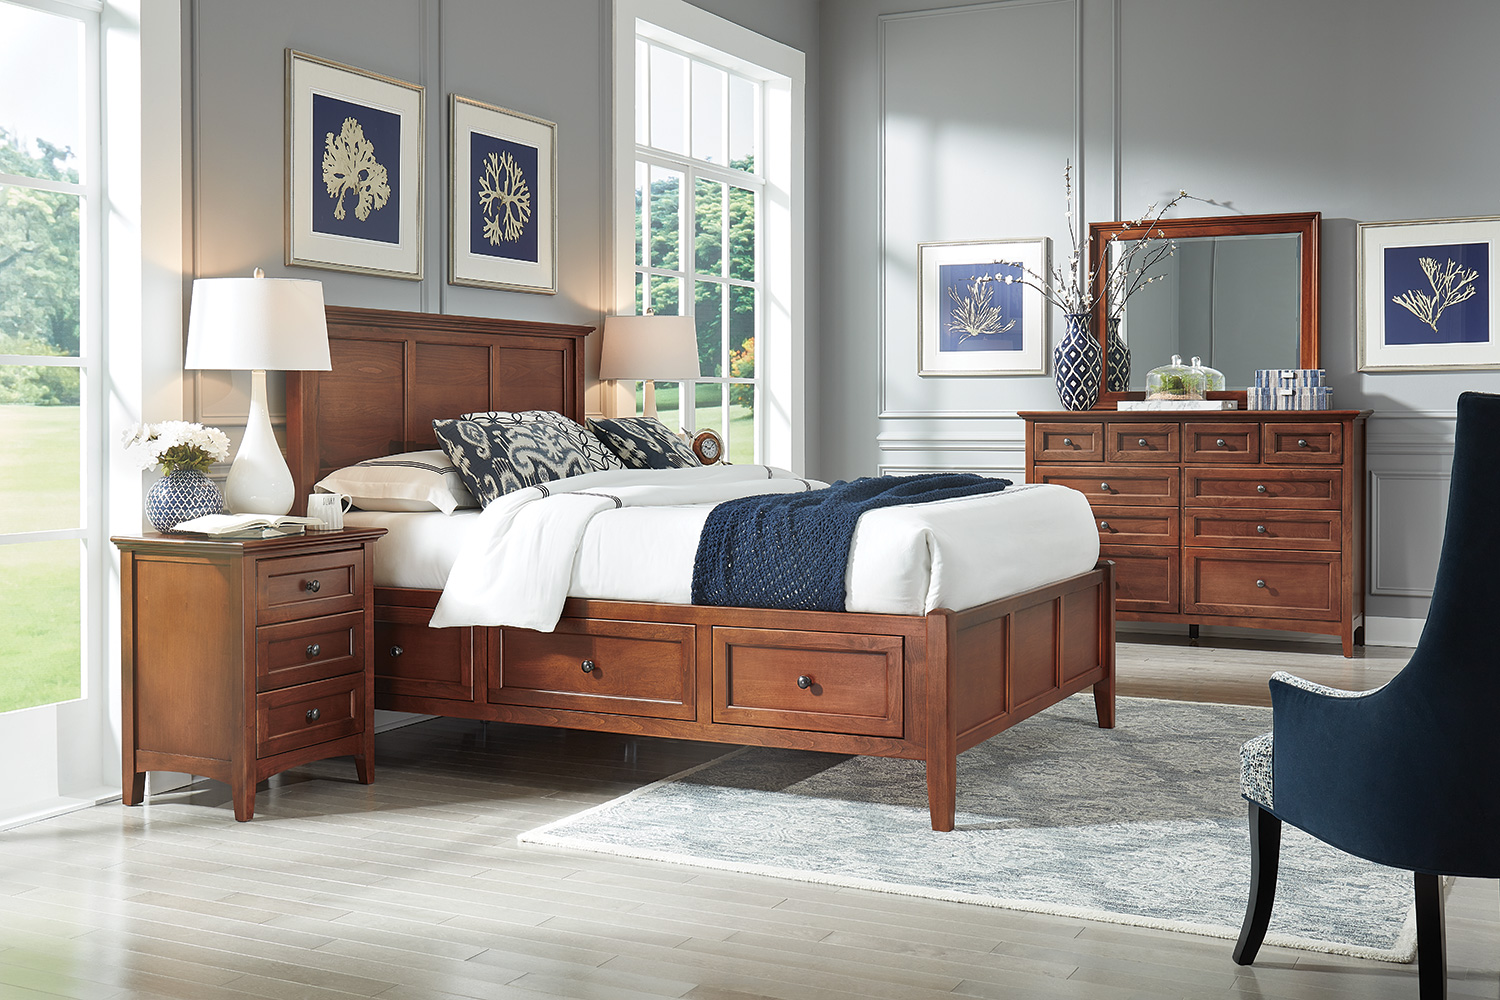 What Bedding Goes With Cherry Wood Furniture